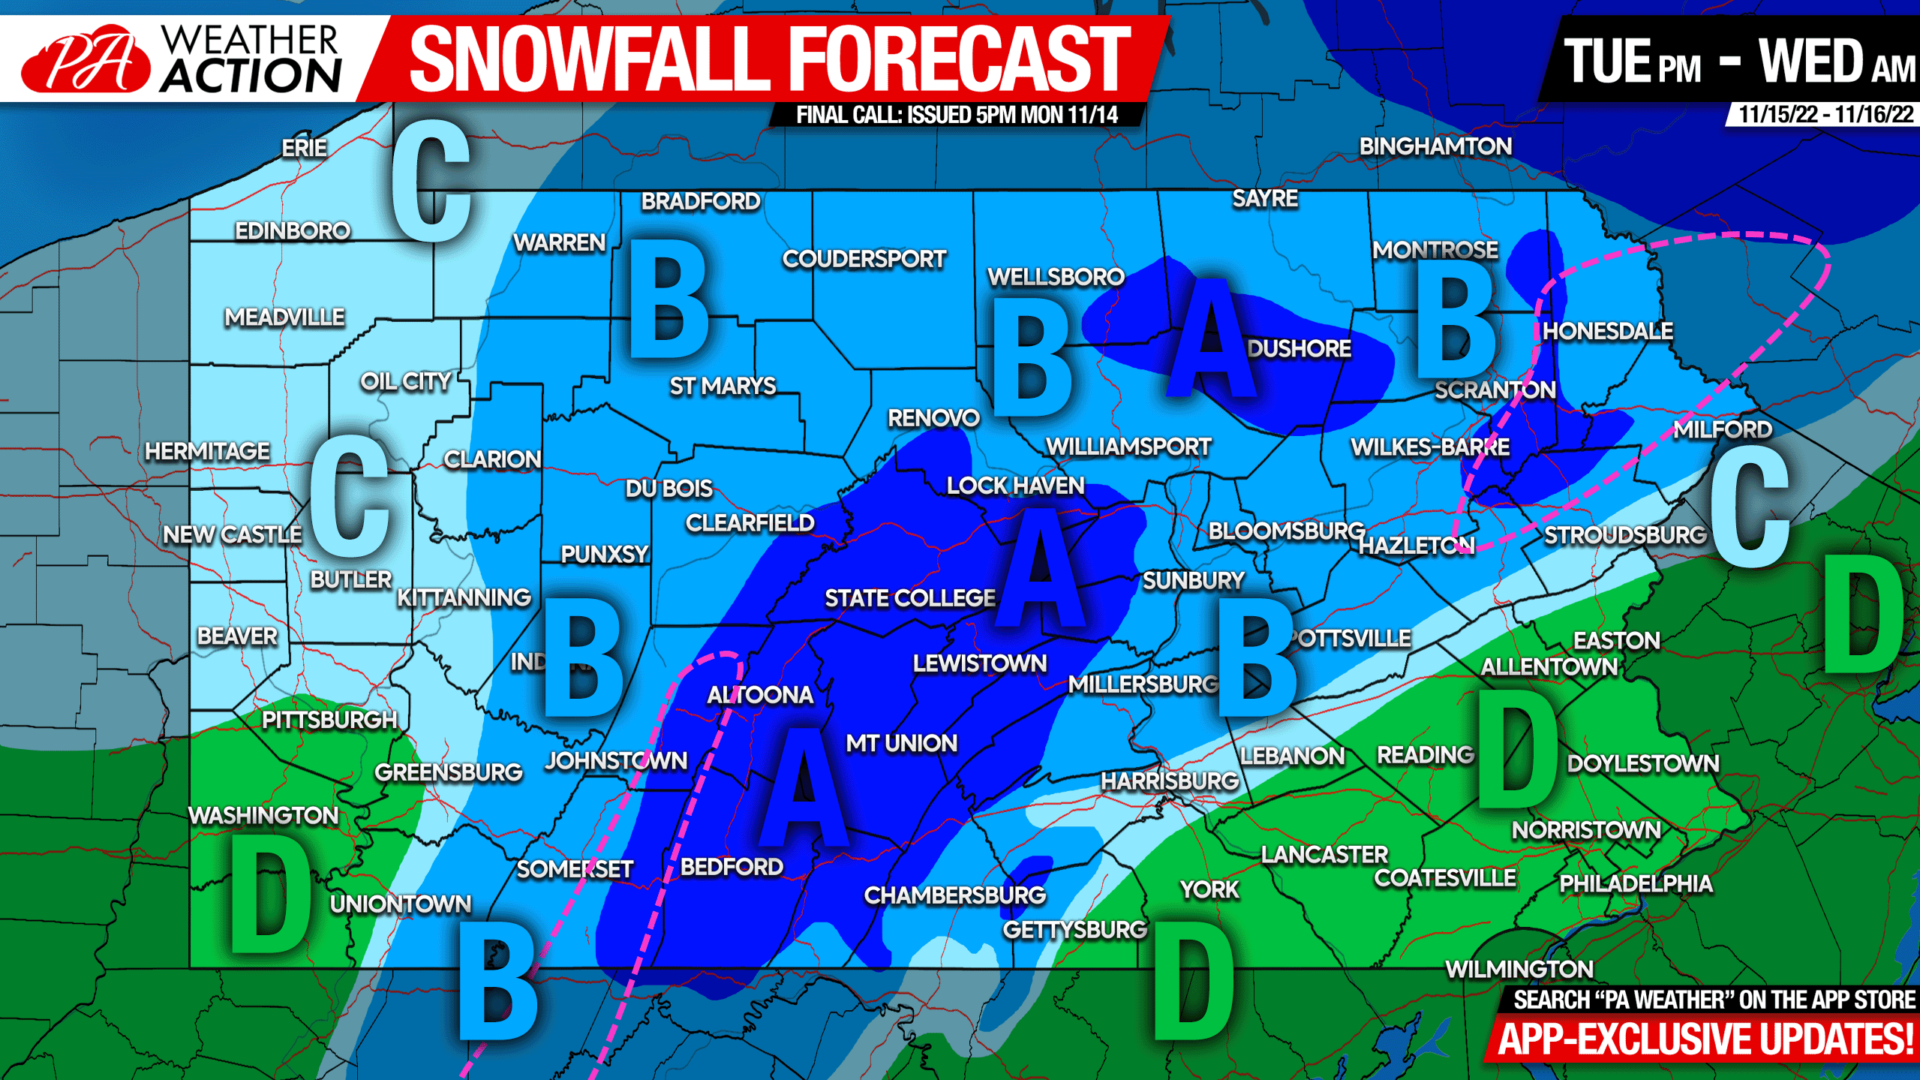 Final Call Snowfall Forecast for Tuesday’s Winter Storm; Amounts Increased in Some Areas